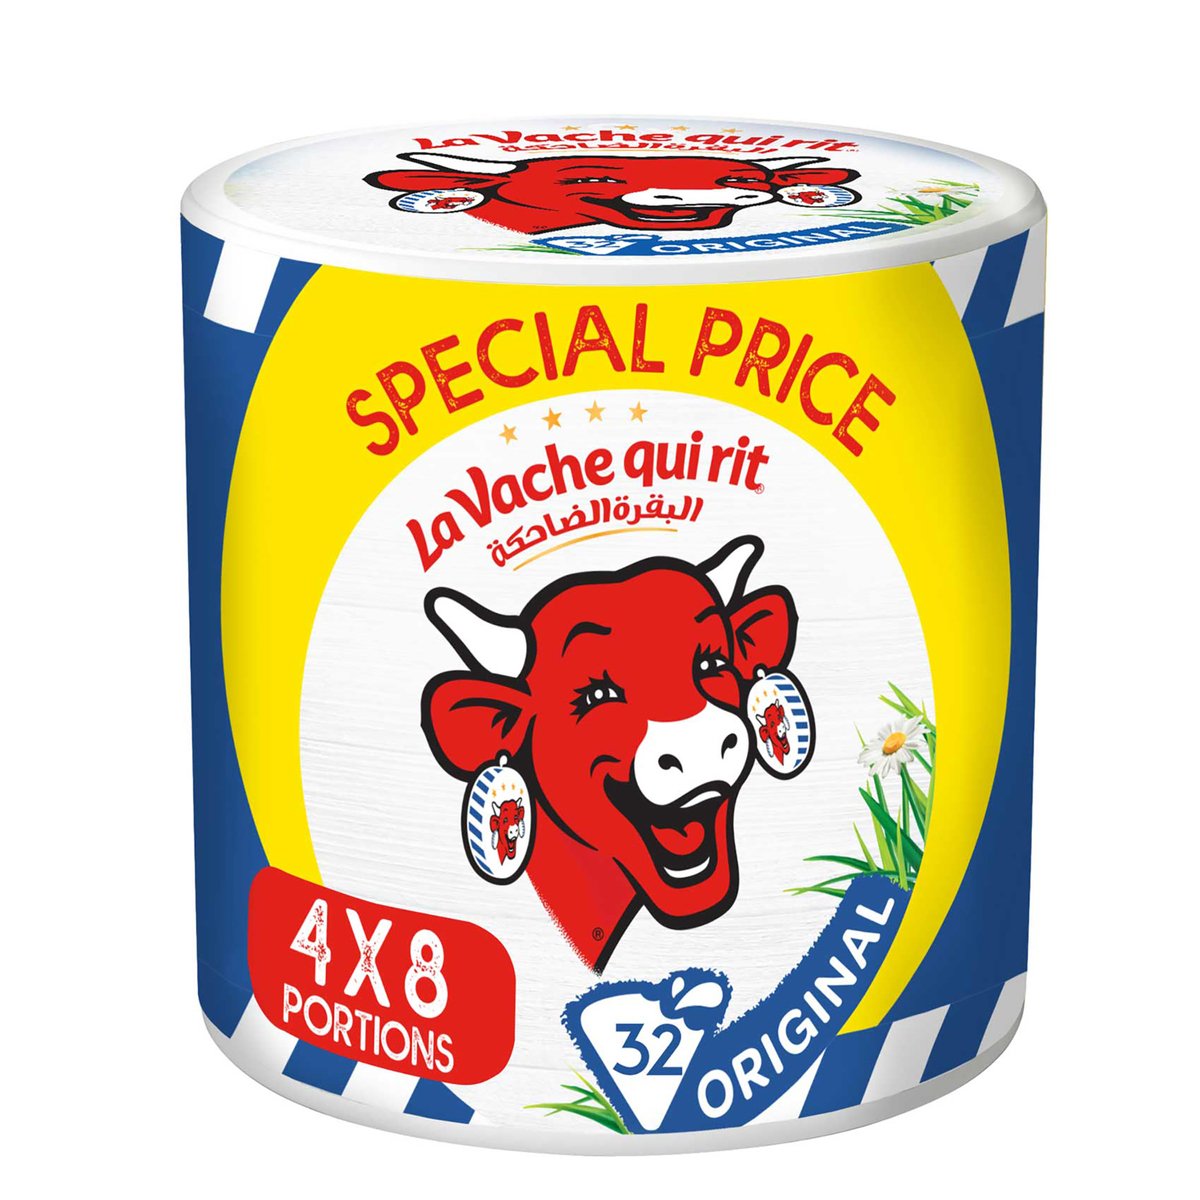 Buy La Vache qui rit Original Spreadable Cheese Triangles 4 x 8 Portions 480 g Online at Best Price | Portion Cheese | Lulu Kuwait in Saudi Arabia